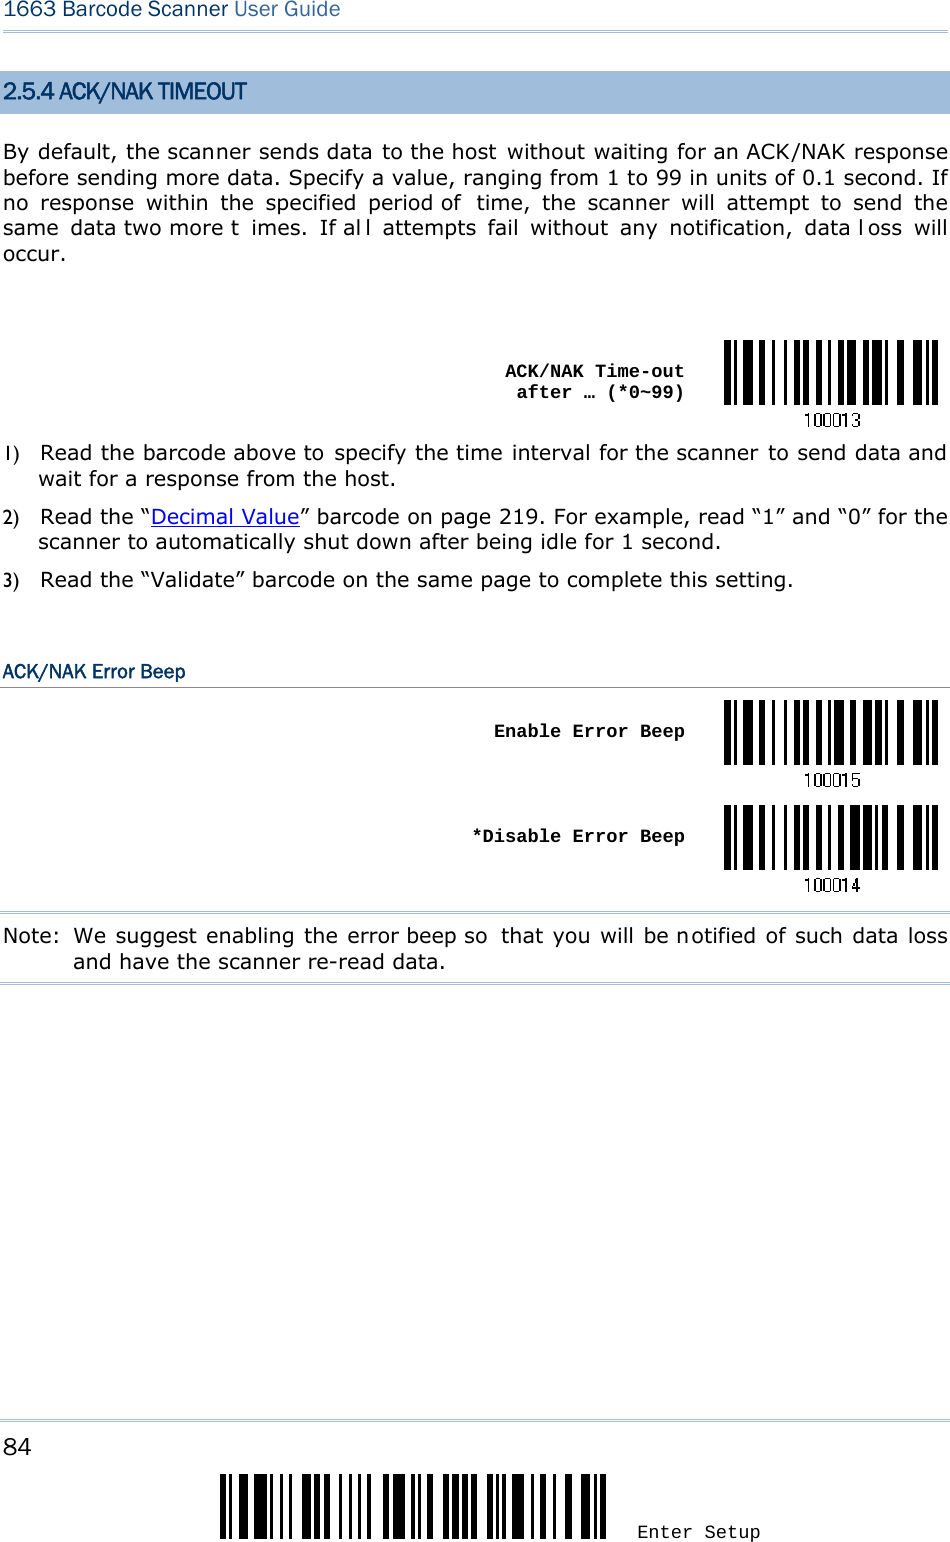 84 Enter Setup 1663 Barcode Scanner User Guide  2.5.4 ACK/NAK TIMEOUT By default, the scanner sends data to the host without waiting for an ACK/NAK response before sending more data. Specify a value, ranging from 1 to 99 in units of 0.1 second. If no response within the specified period of  time, the scanner will attempt to send the same data two more t imes. If al l attempts fail without any notification, data l oss will occur.   ACK/NAK Time-out after … (*0~99)1) Read the barcode above to specify the time interval for the scanner to send data and wait for a response from the host.             2) Read the “Decimal Value” barcode on page 219. For example, read “1” and “0” for the scanner to automatically shut down after being idle for 1 second.   3) Read the “Validate” barcode on the same page to complete this setting.  ACK/NAK Error Beep  Enable Error Beep *Disable Error BeepNote:  We suggest enabling the error beep so  that you will be notified of such data loss and have the scanner re-read data.    